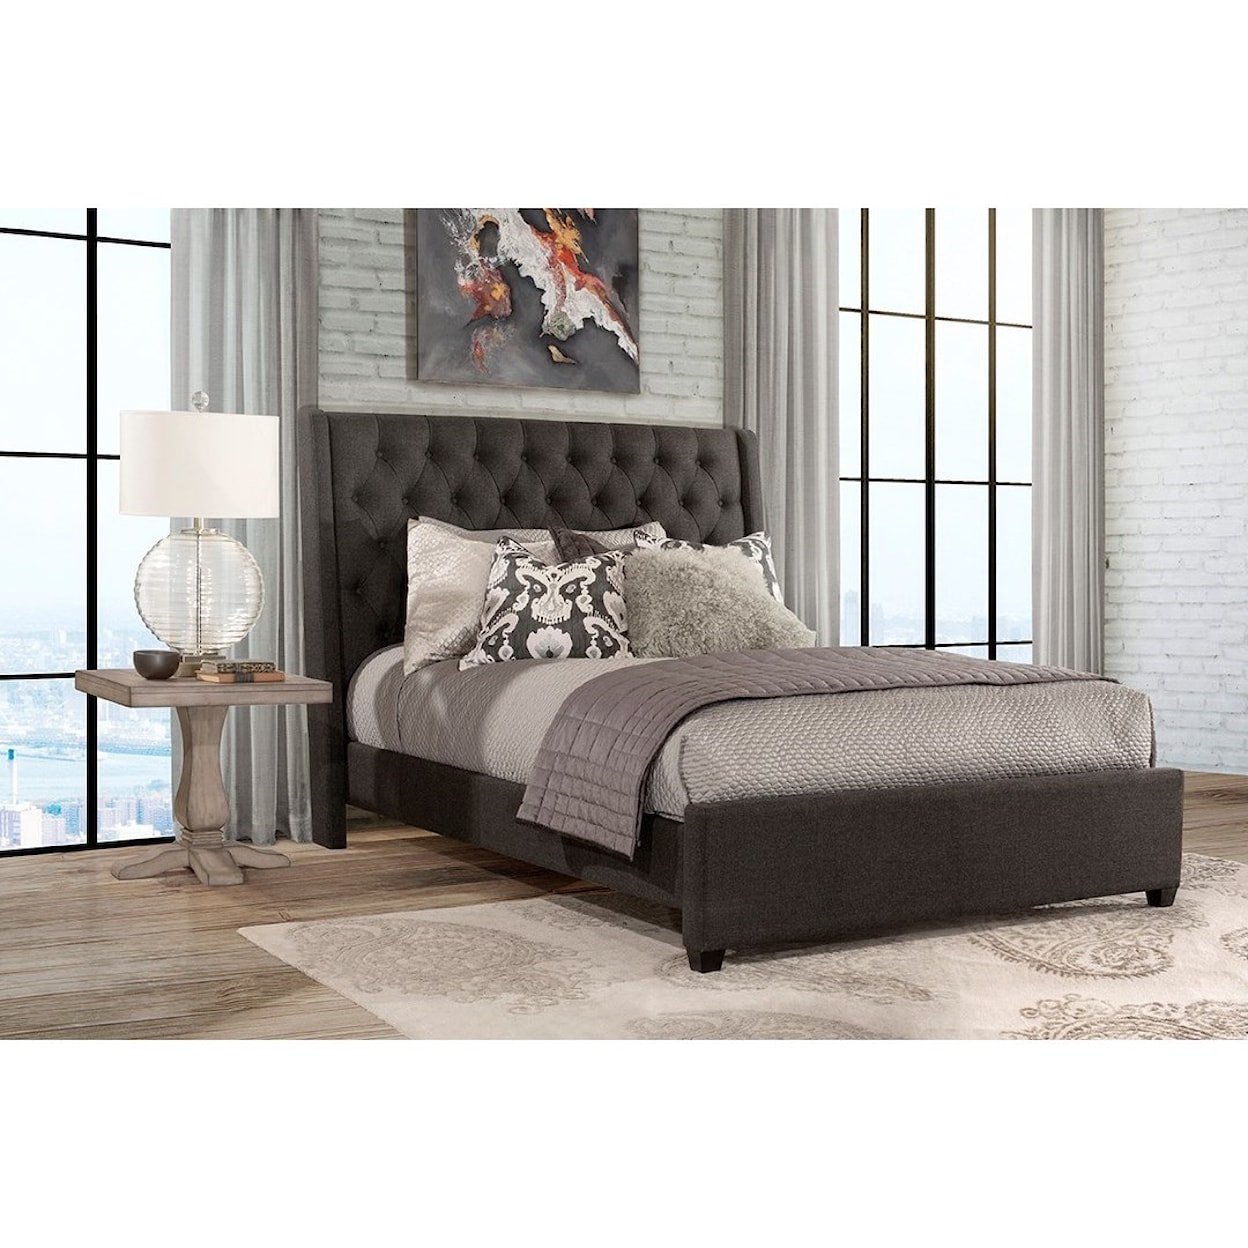 Hillsdale Churchill 2299bkro Traditional King Size Upholstered Bed With Tufting Westrich